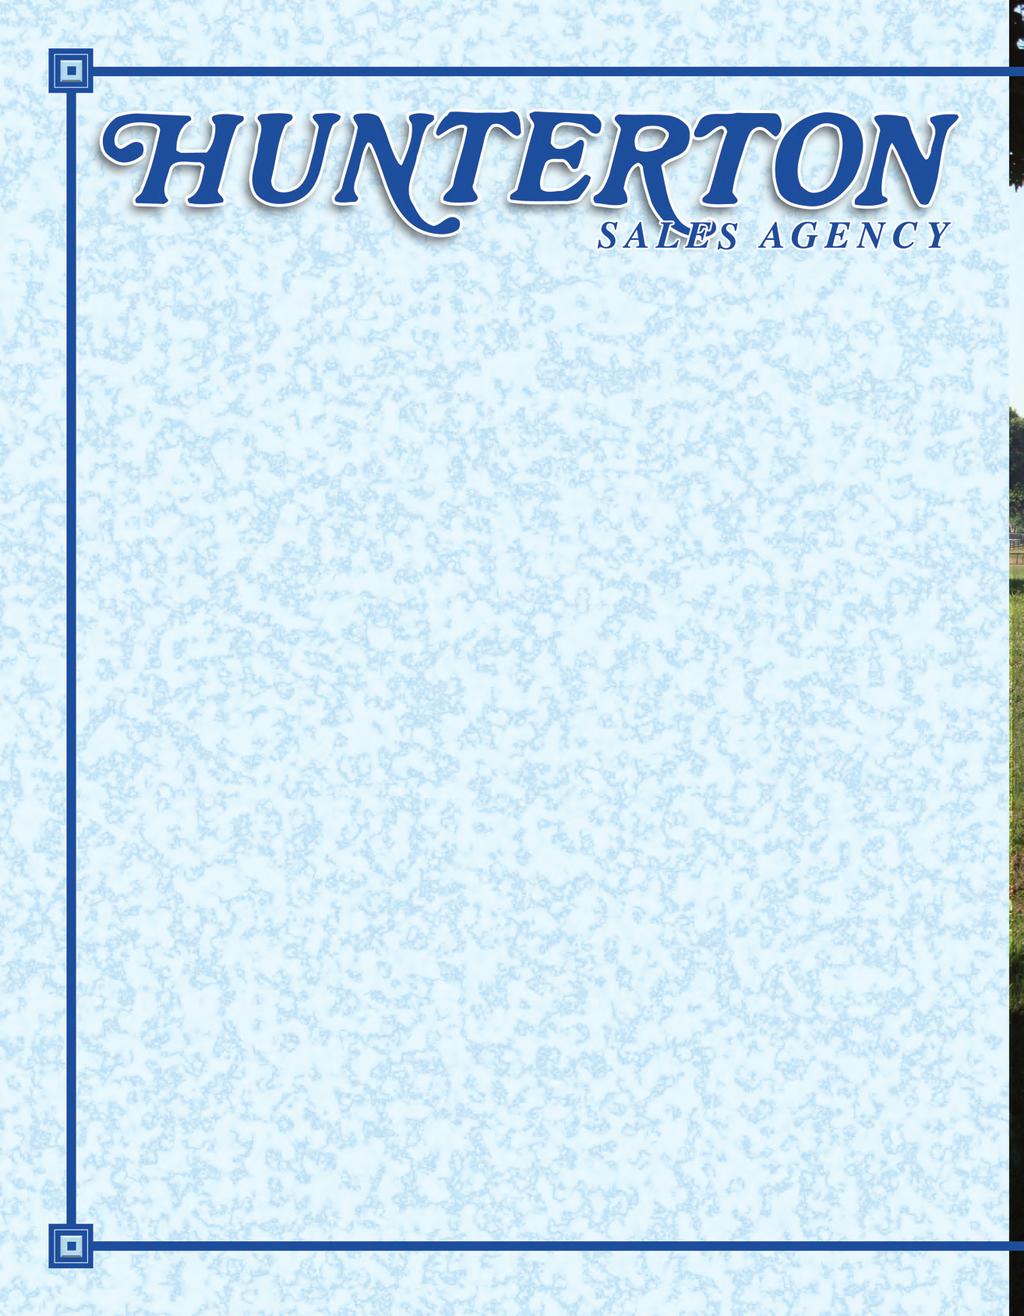 As you begin your search for the best yearlings, be sure to visit Hunterton.